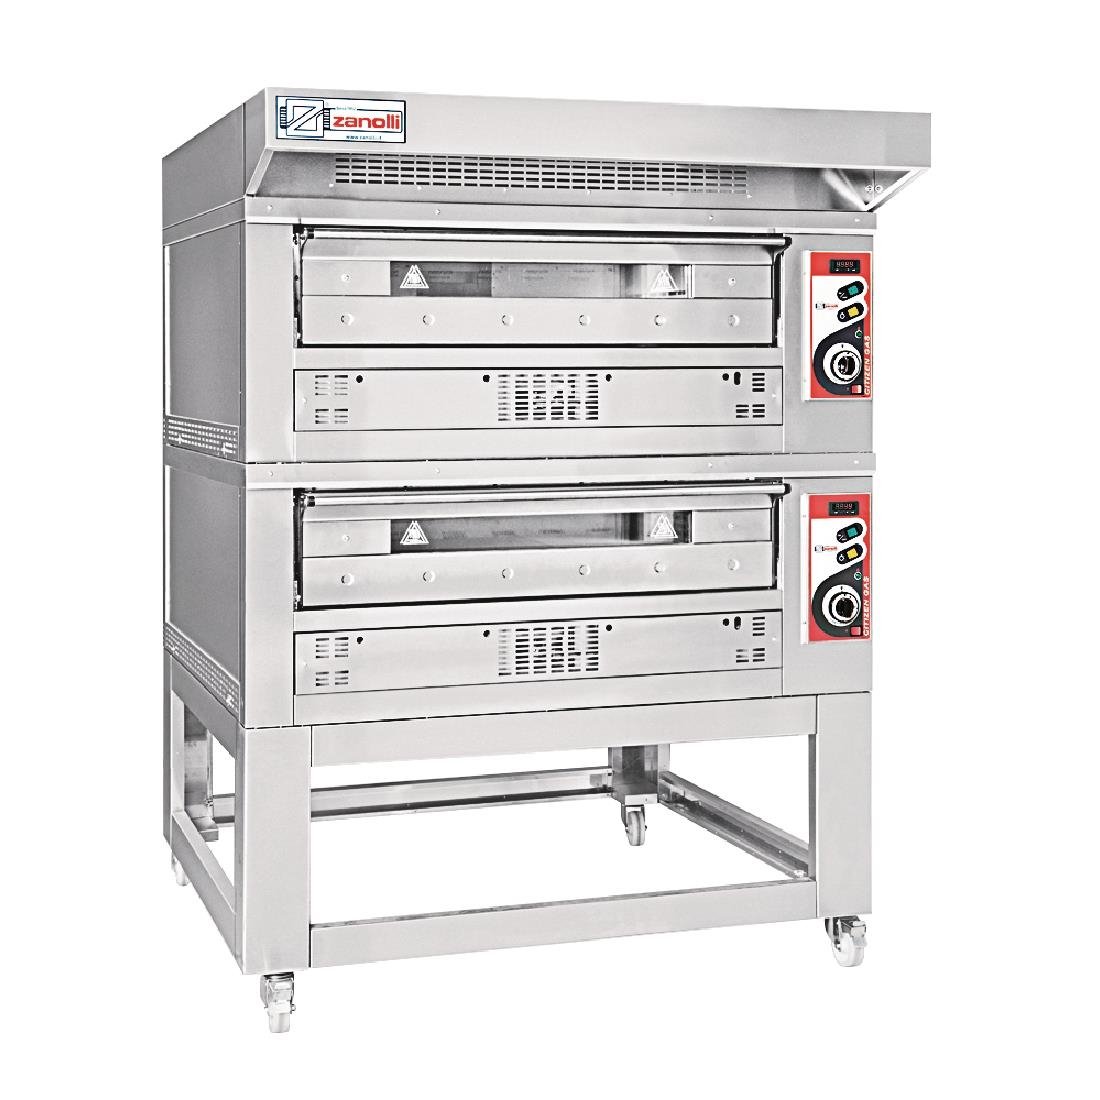 FC747 Hood for Citizen 9 Pizza Oven JD Catering Equipment Solutions Ltd